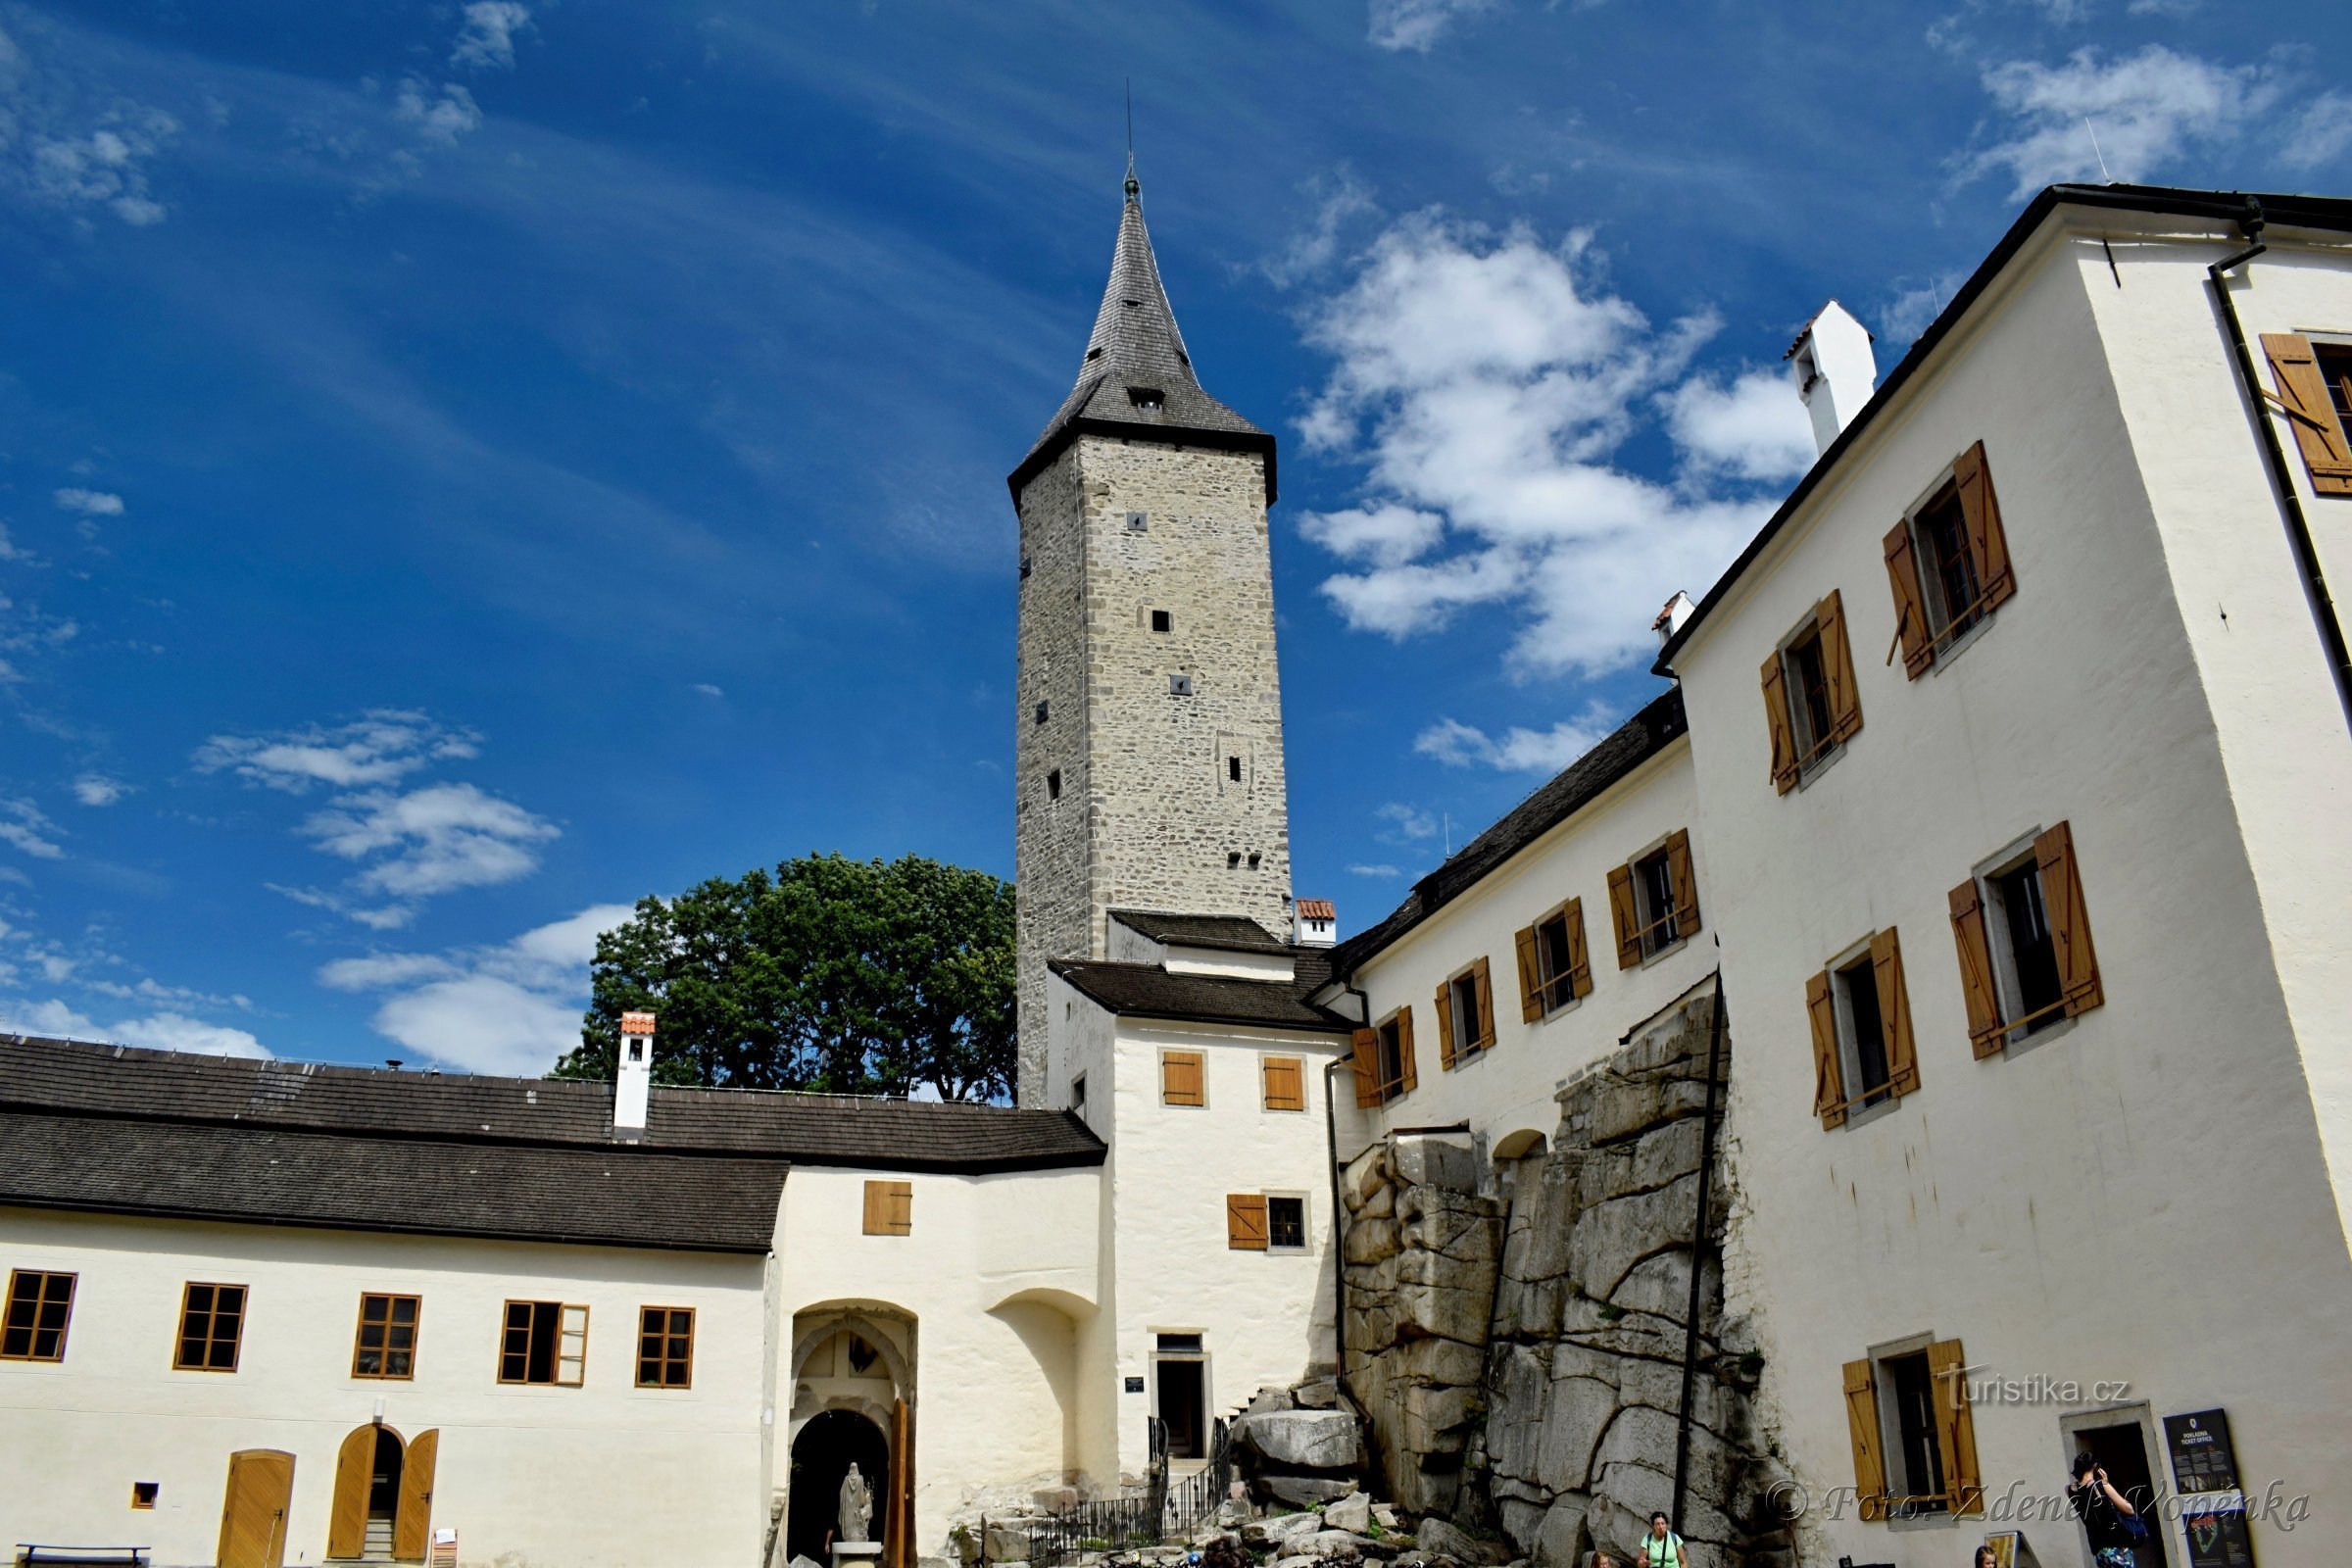 View of the castle from the courtyard.